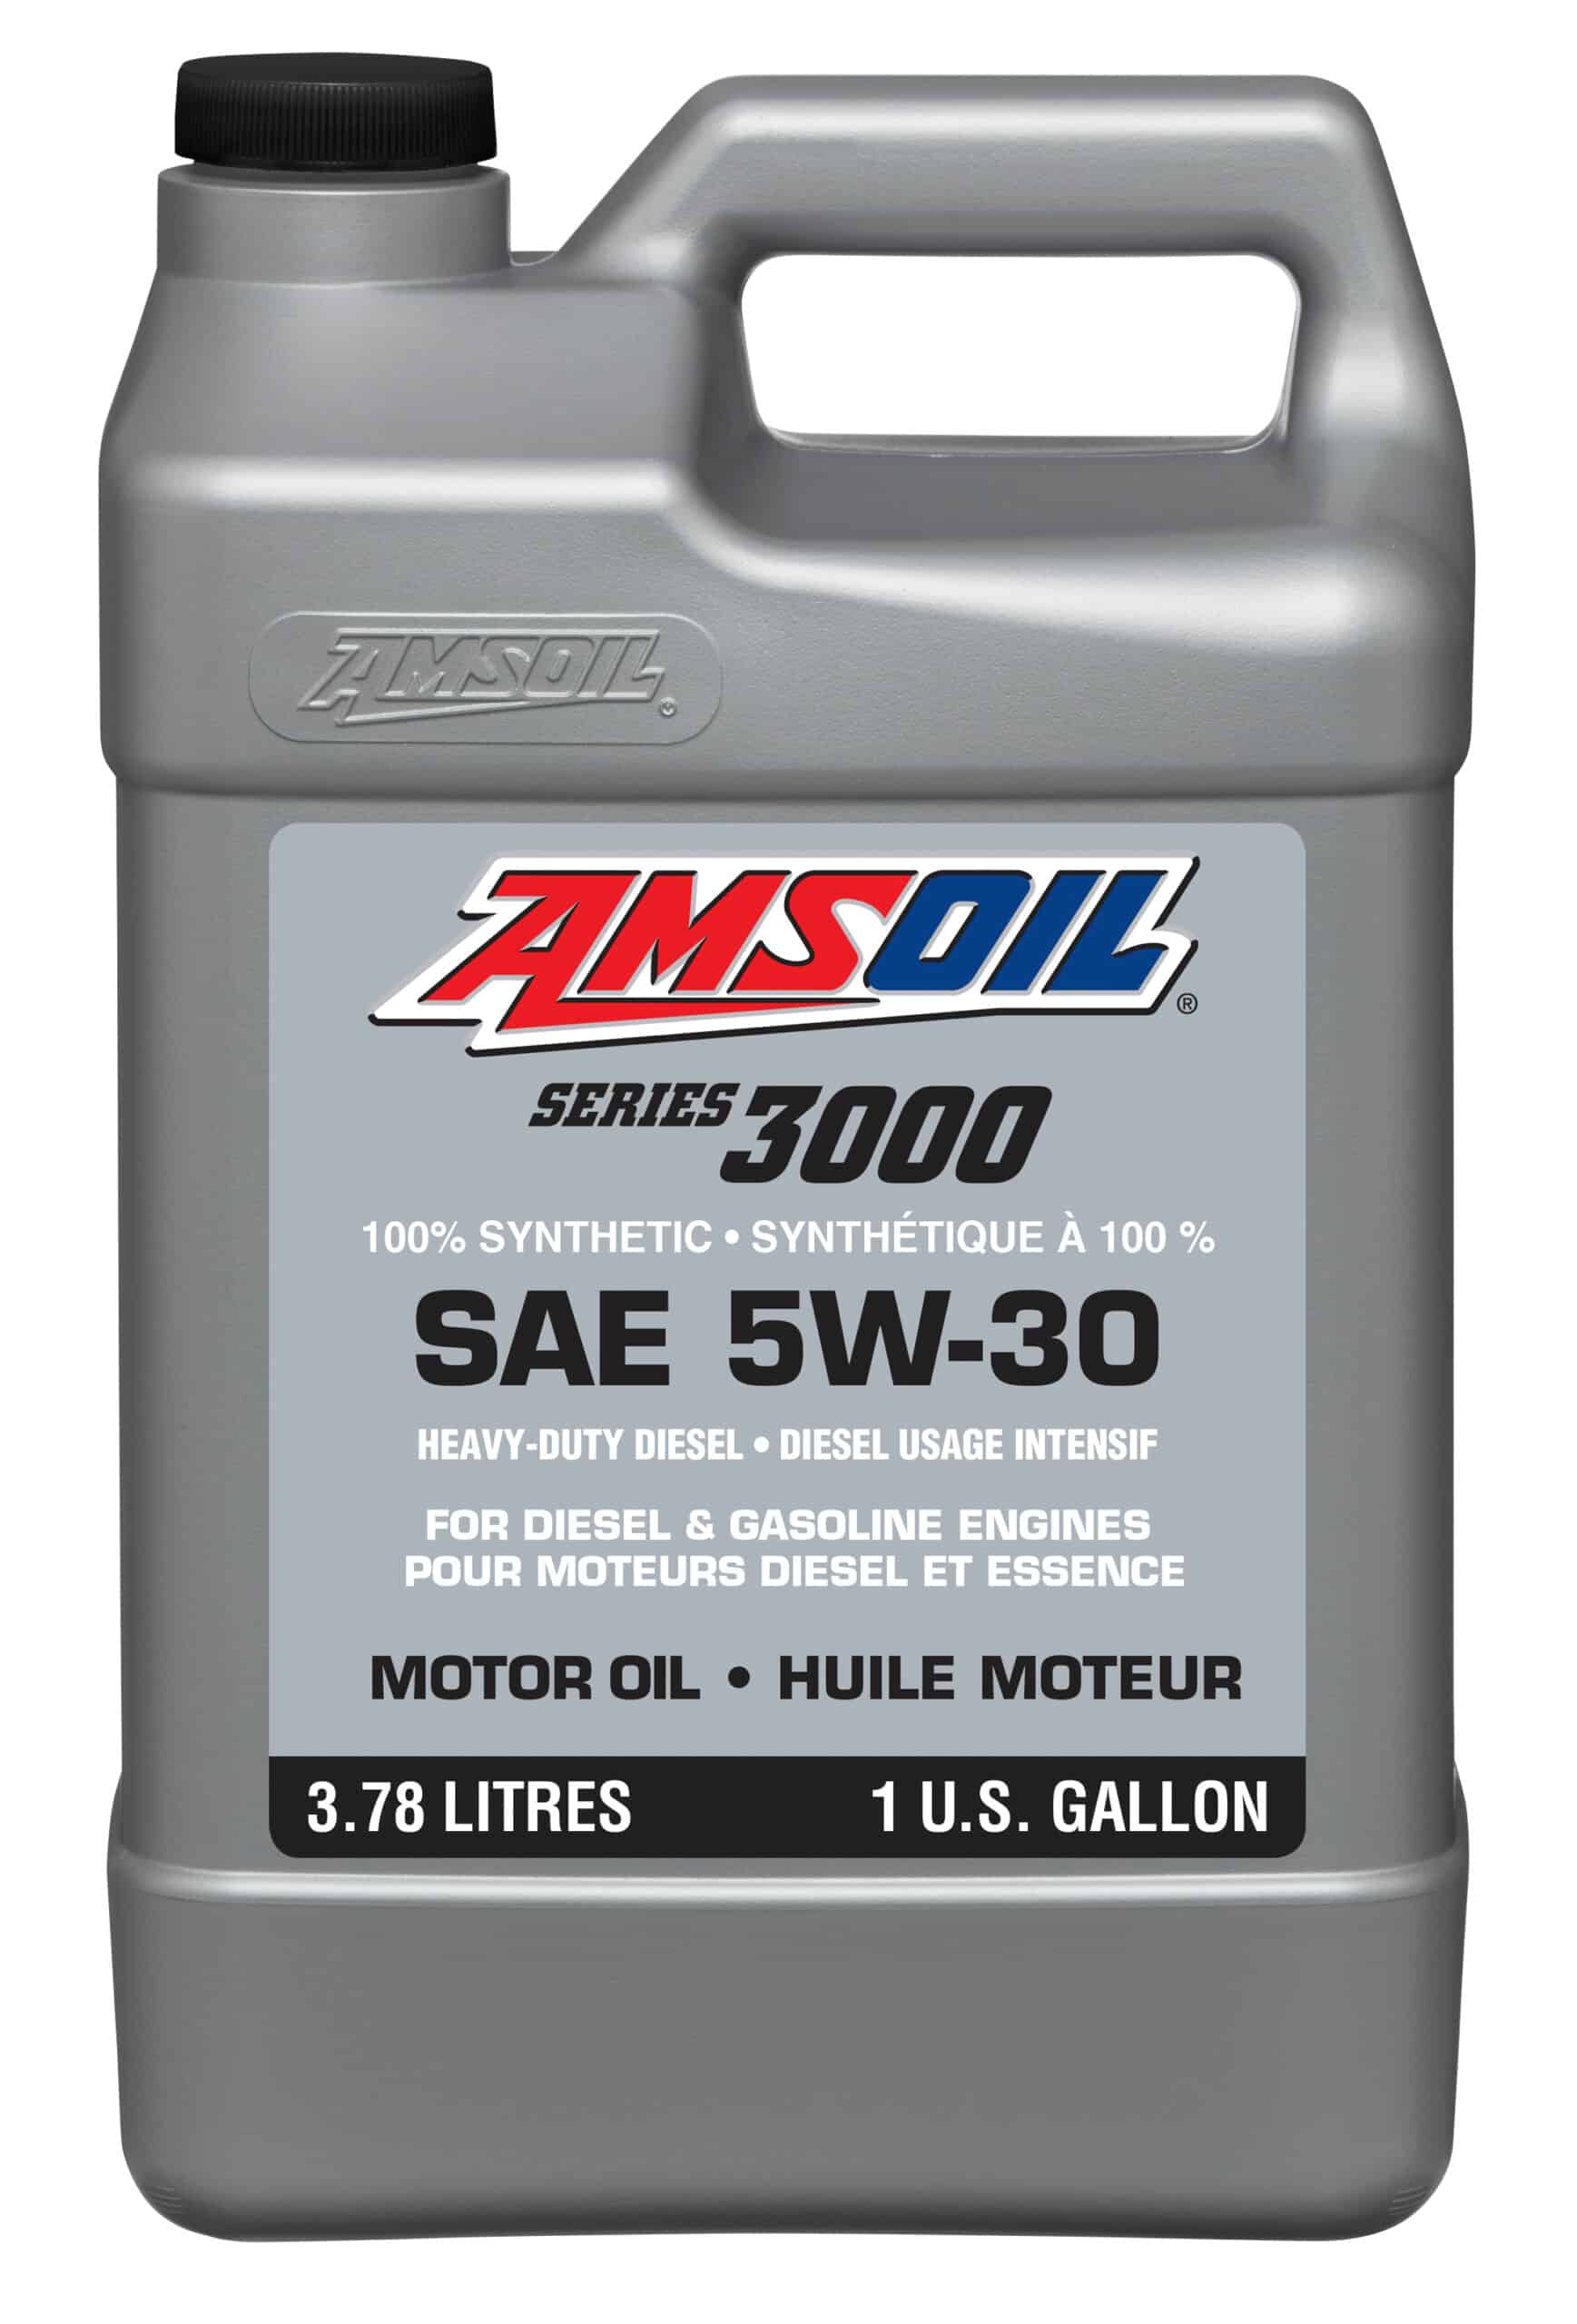 A gallon of AMSOIL Synthetic Heavy Duty Diesel Oil, formulated to deliver extraordinary lubrication in diesel, gasoline engines found in commercial, fleet, personal vehicles.